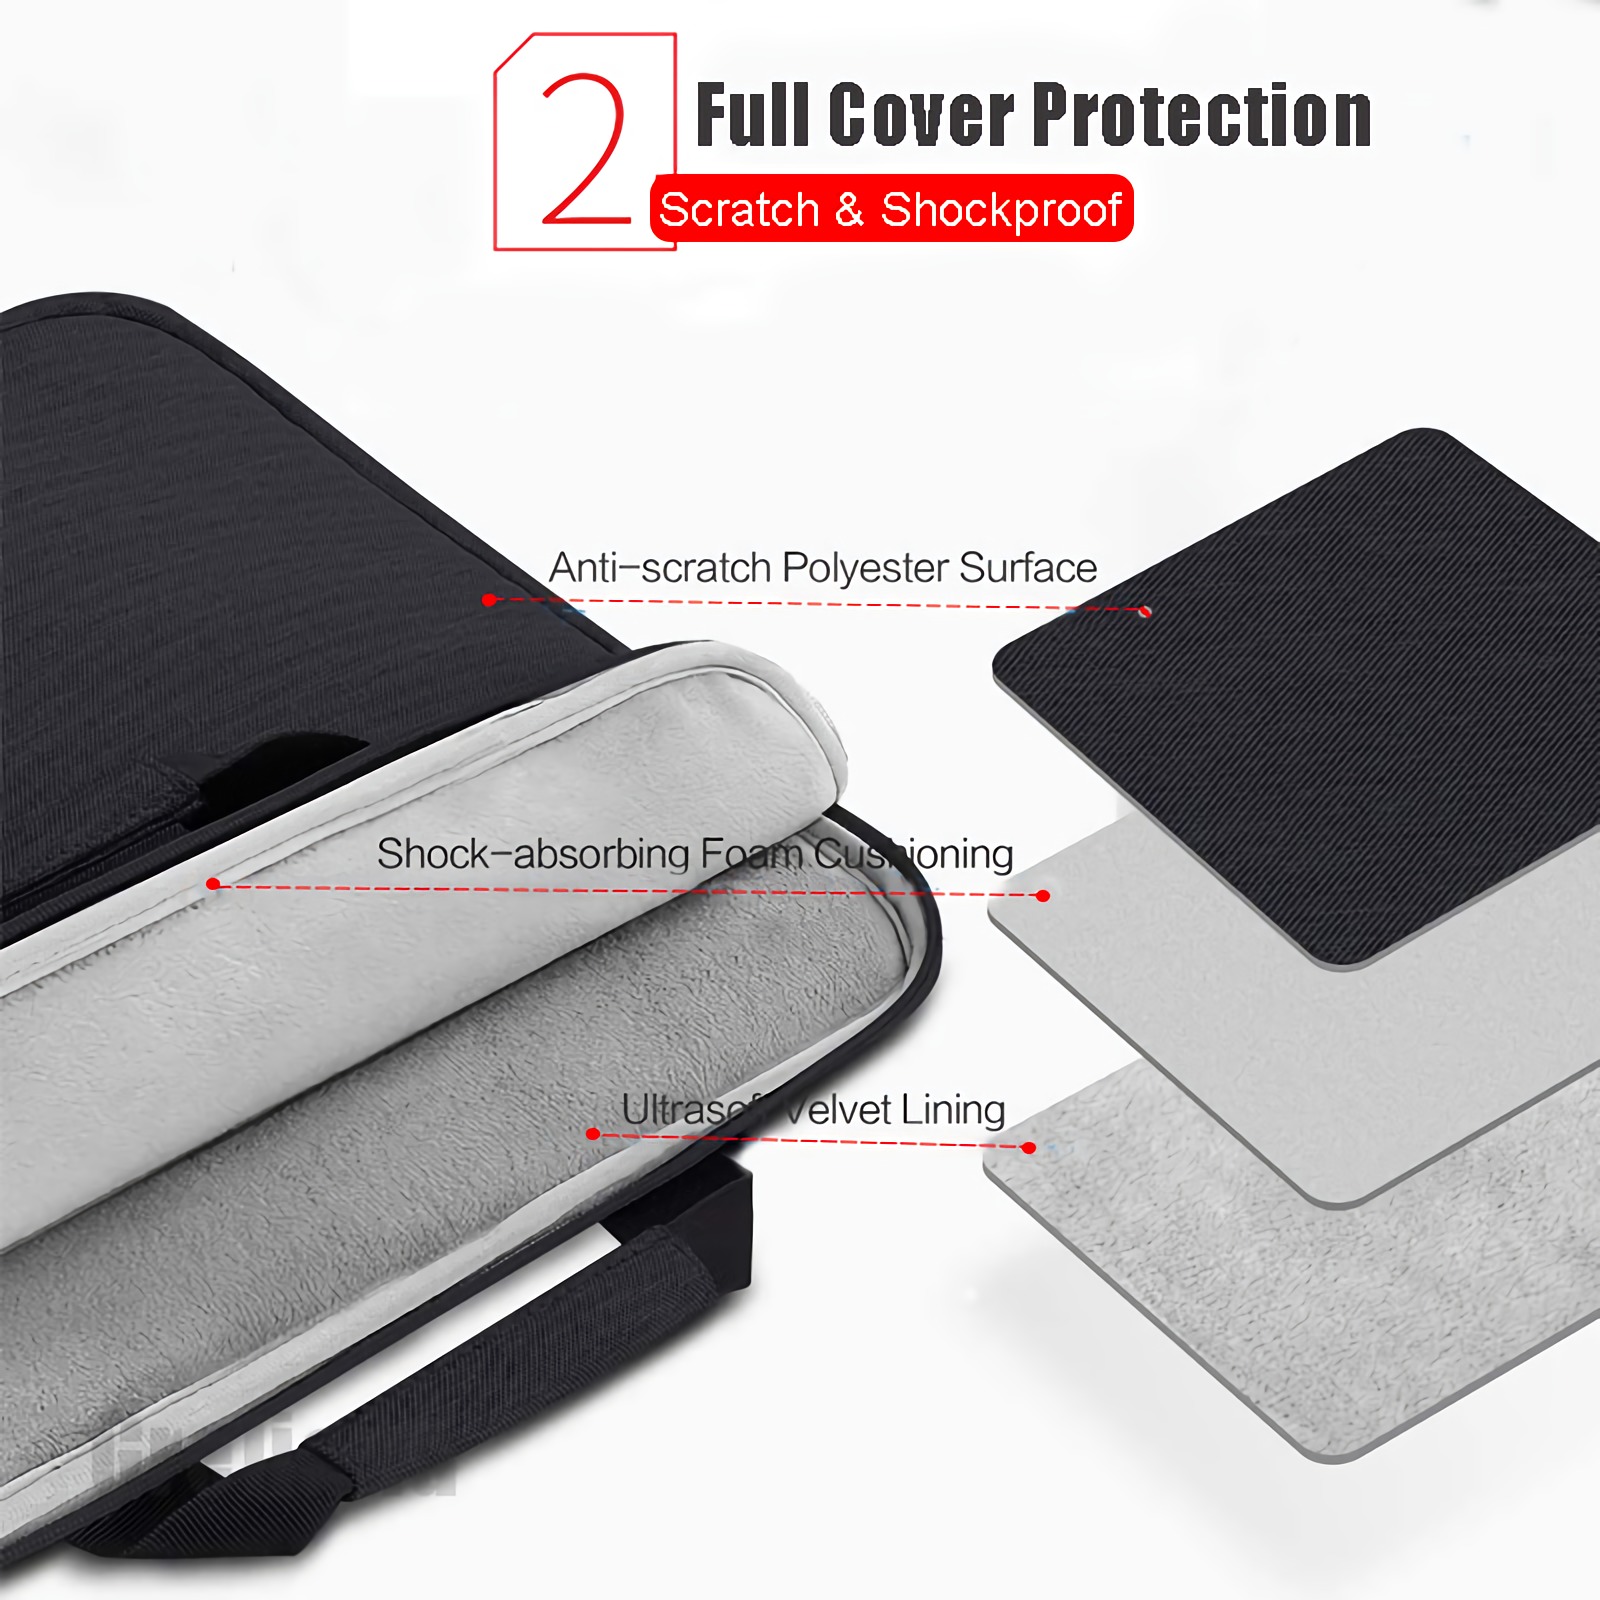 Multi-use Strap Laptop Sleeve Bag With Handle For 10